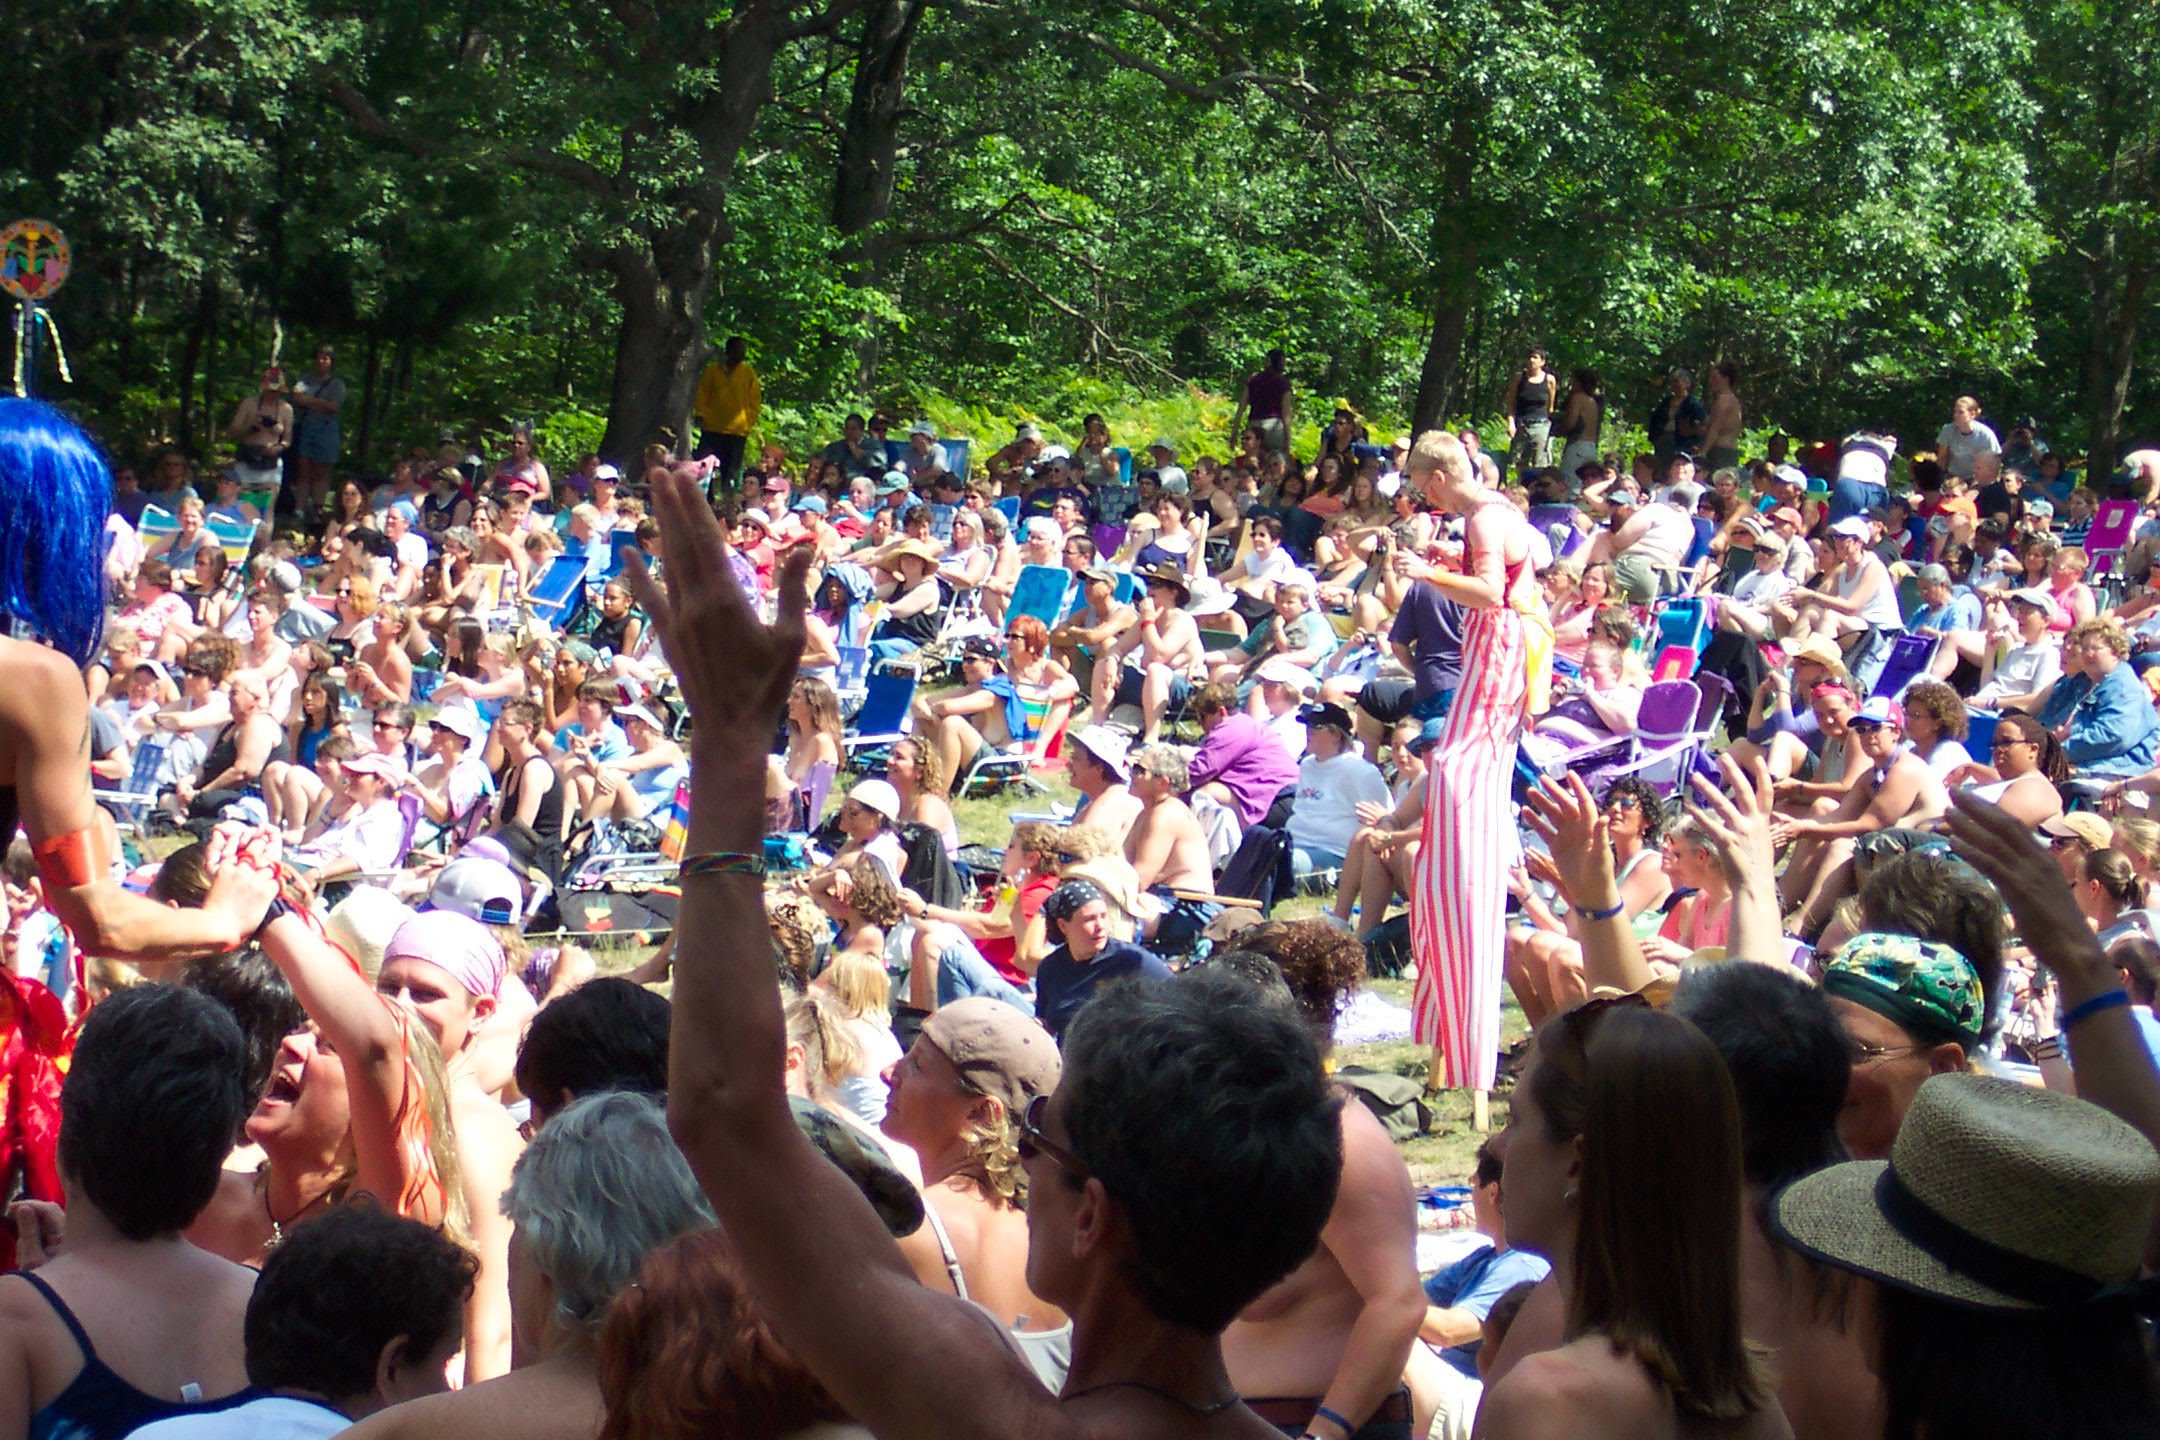 The crowds at the Michigan Womyn's Music Festival. (Photo: Courtesy of the Michigan Womyn's Music Festival)